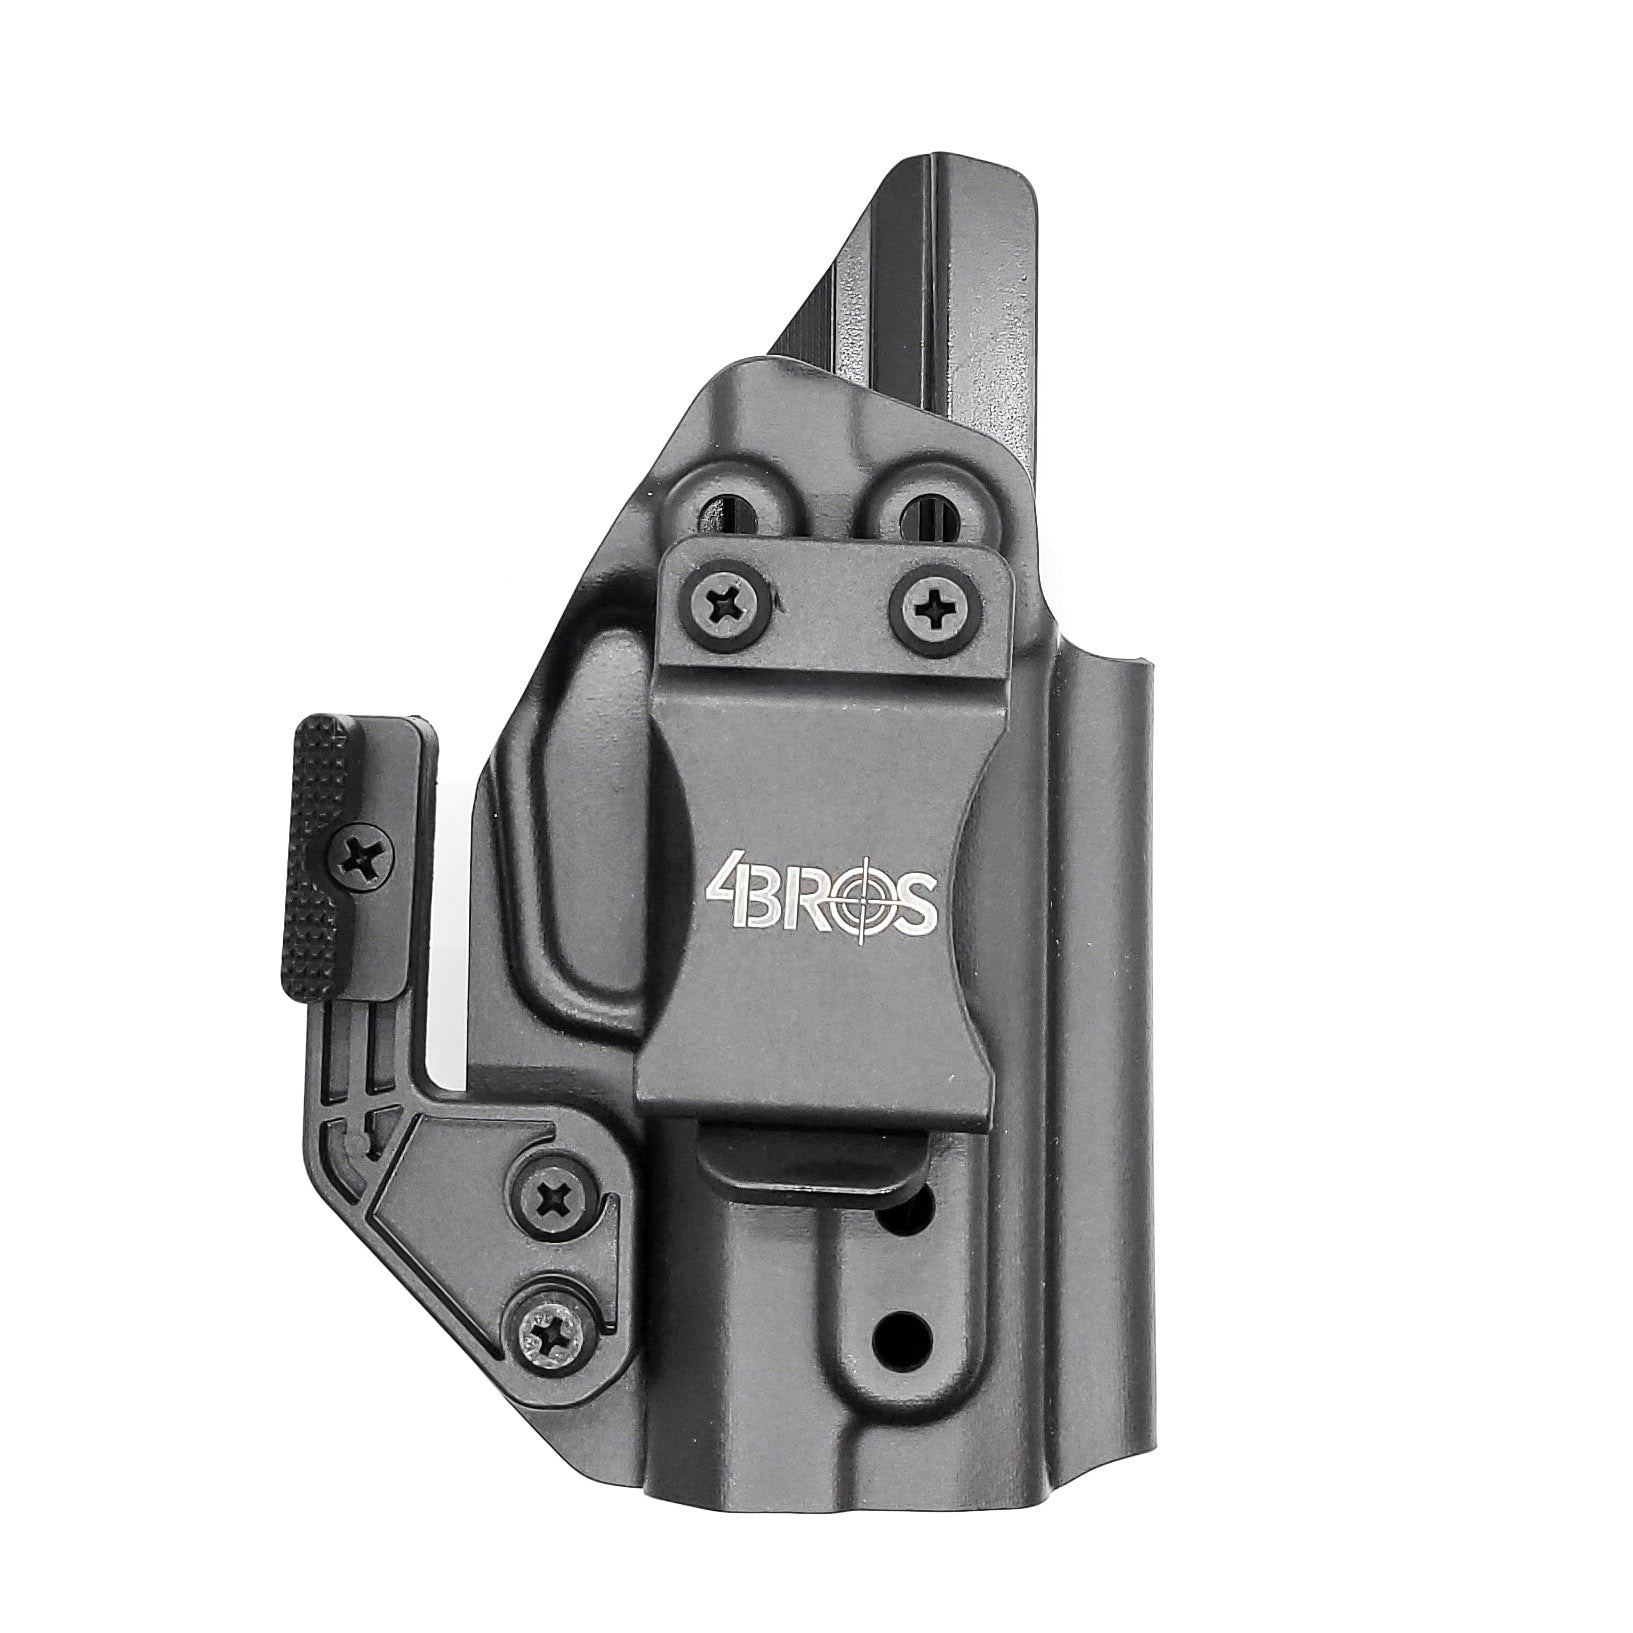 Inside waistband holster designed to fit the Sig Sauer P365 and P365XL pistol series with the Tactical Development Pro Ledge Tactical Application Rail installed. This holster will fit the Sig P365, P365X, P365XL Spectre, P365 XL RomeoZero, P365X RomeoZero, P365 SAS and P365XL Spectre Comp with the Pro Ledge Rail.